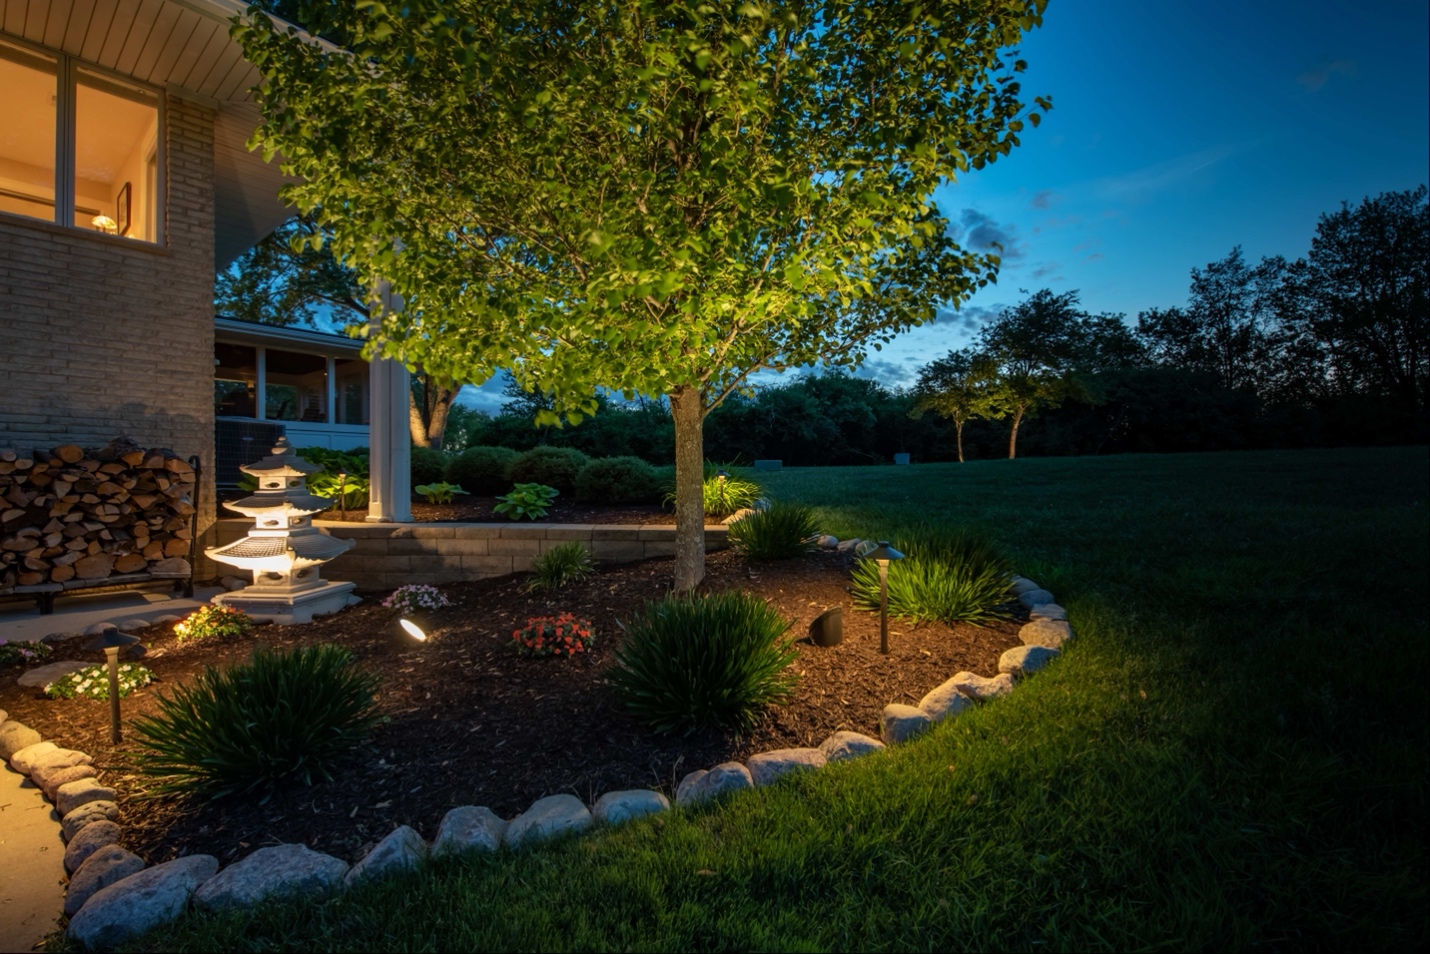 A picture containing tree, grass, outdoor, house

Description automatically generated